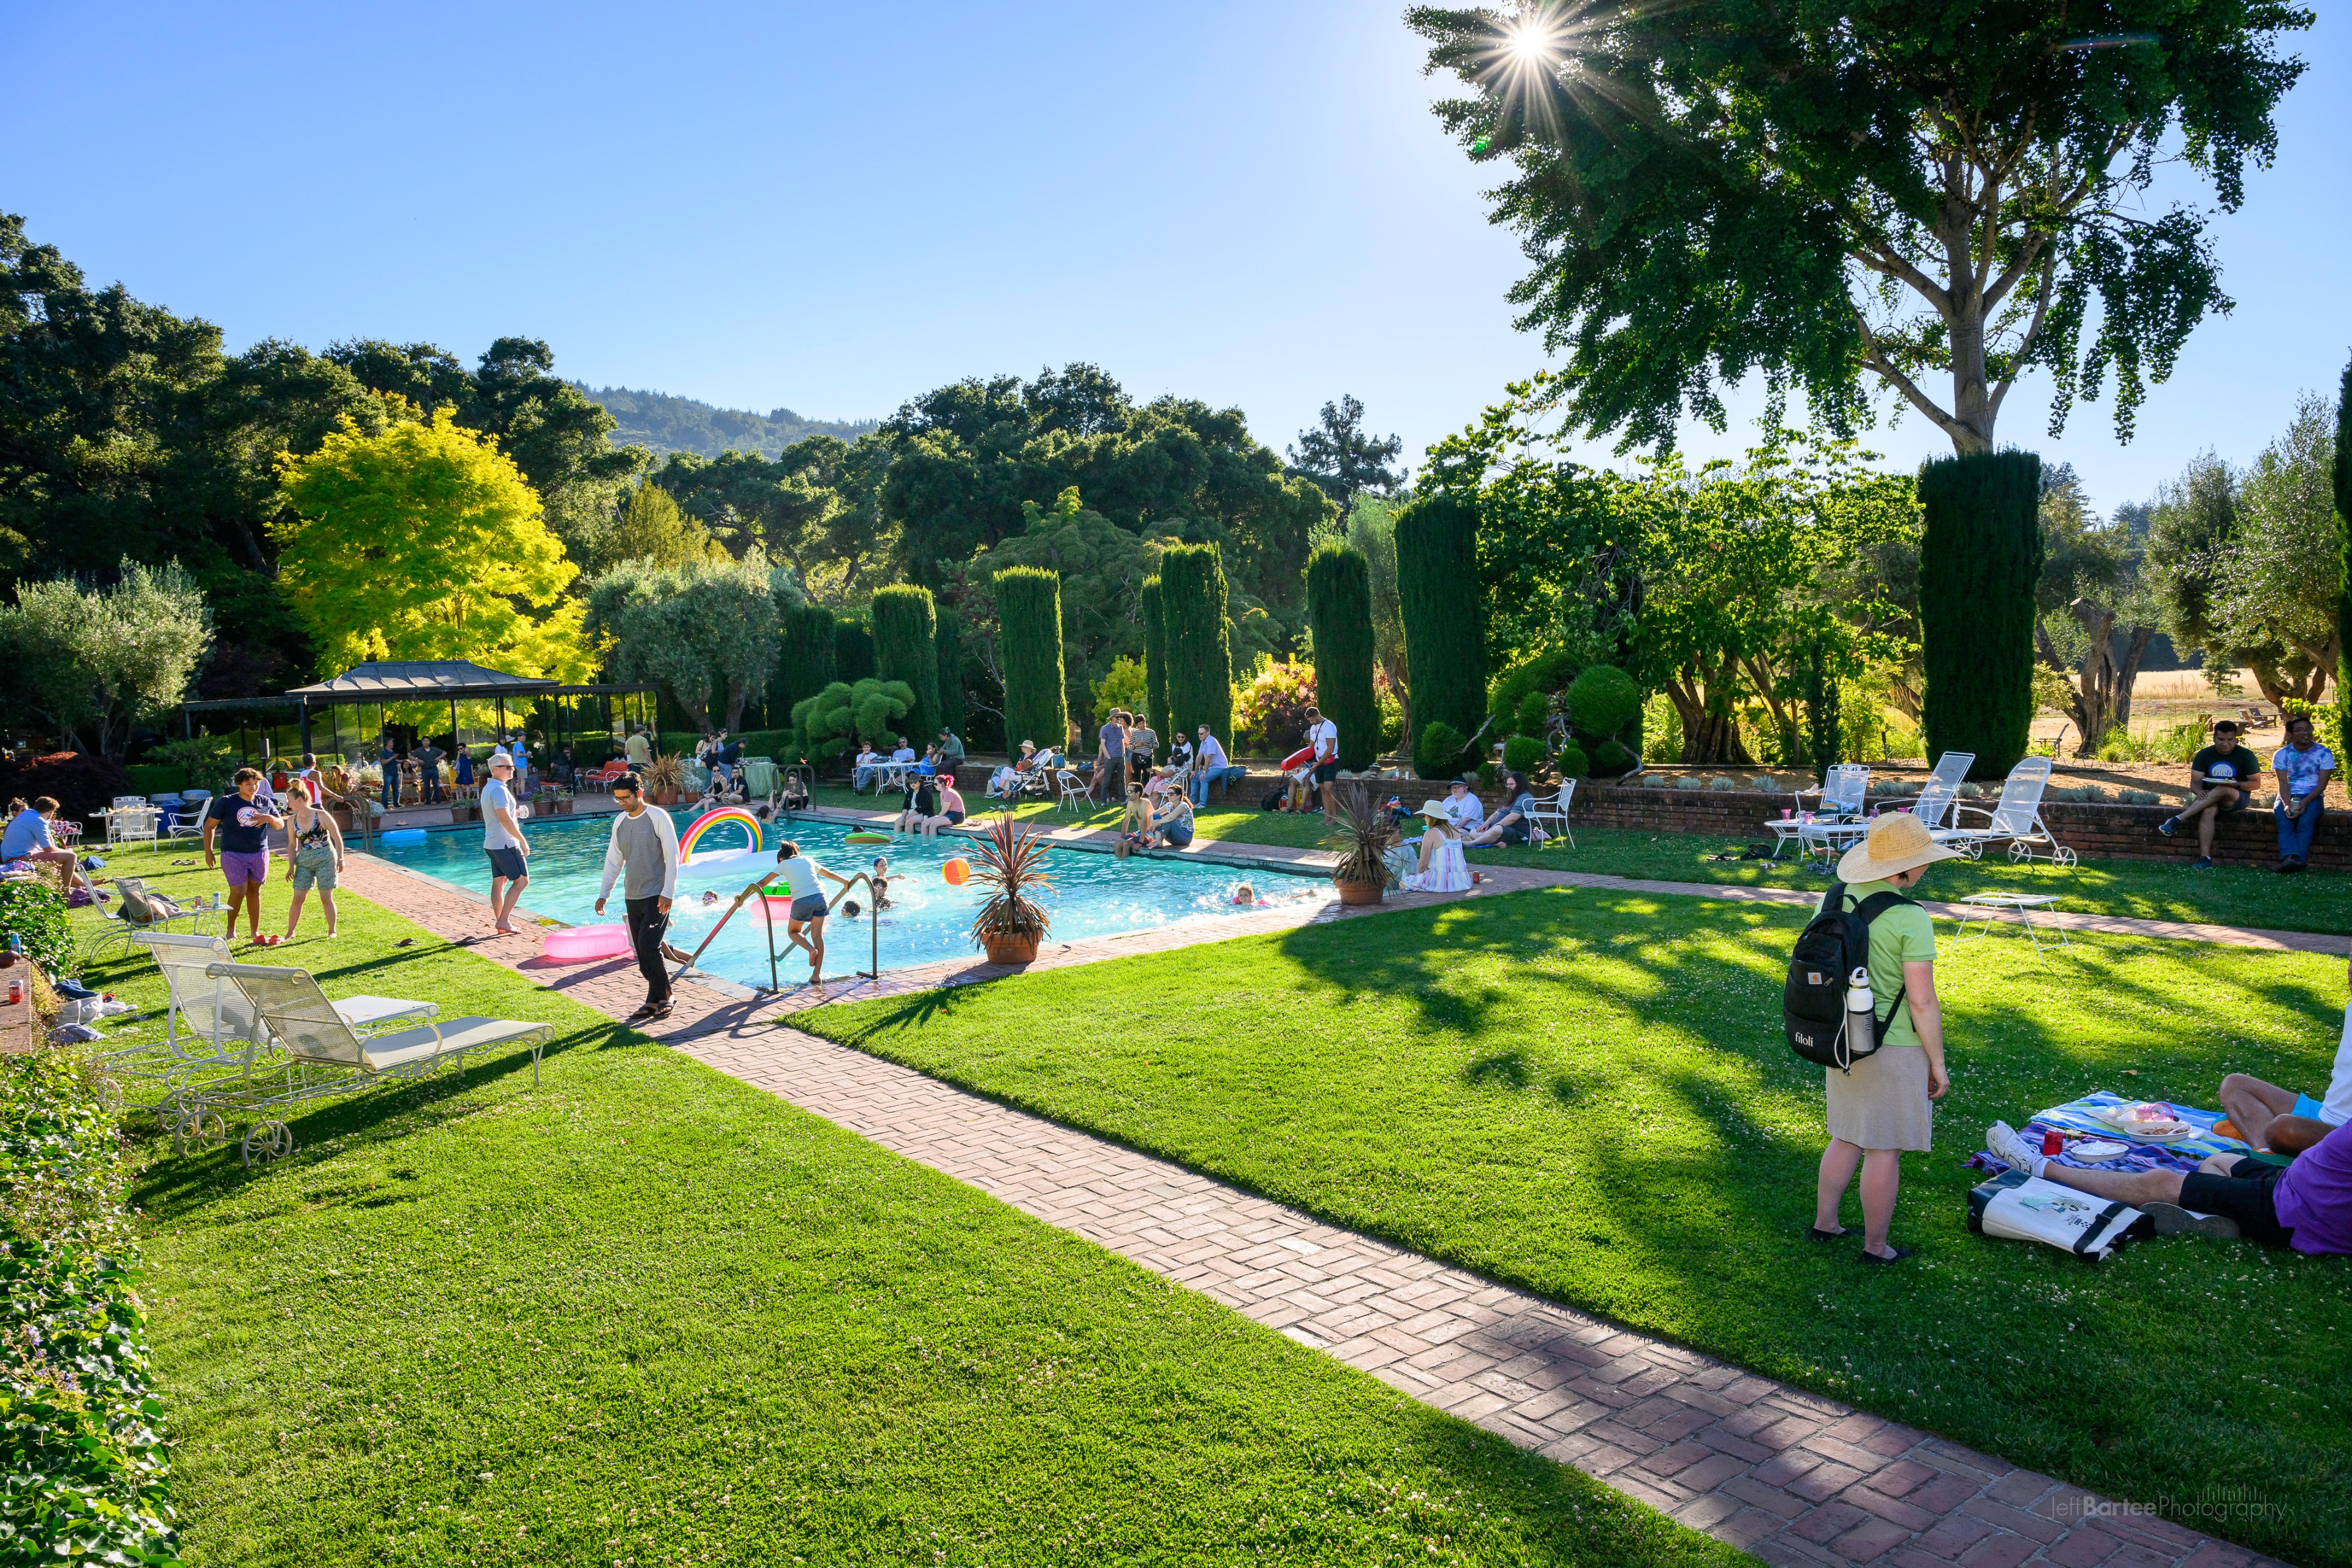 A sunny, lively outdoor pool scene with people swimming and relaxing on lounge chairs, surrounded by lush greenery and large trees, under a clear blue sky.